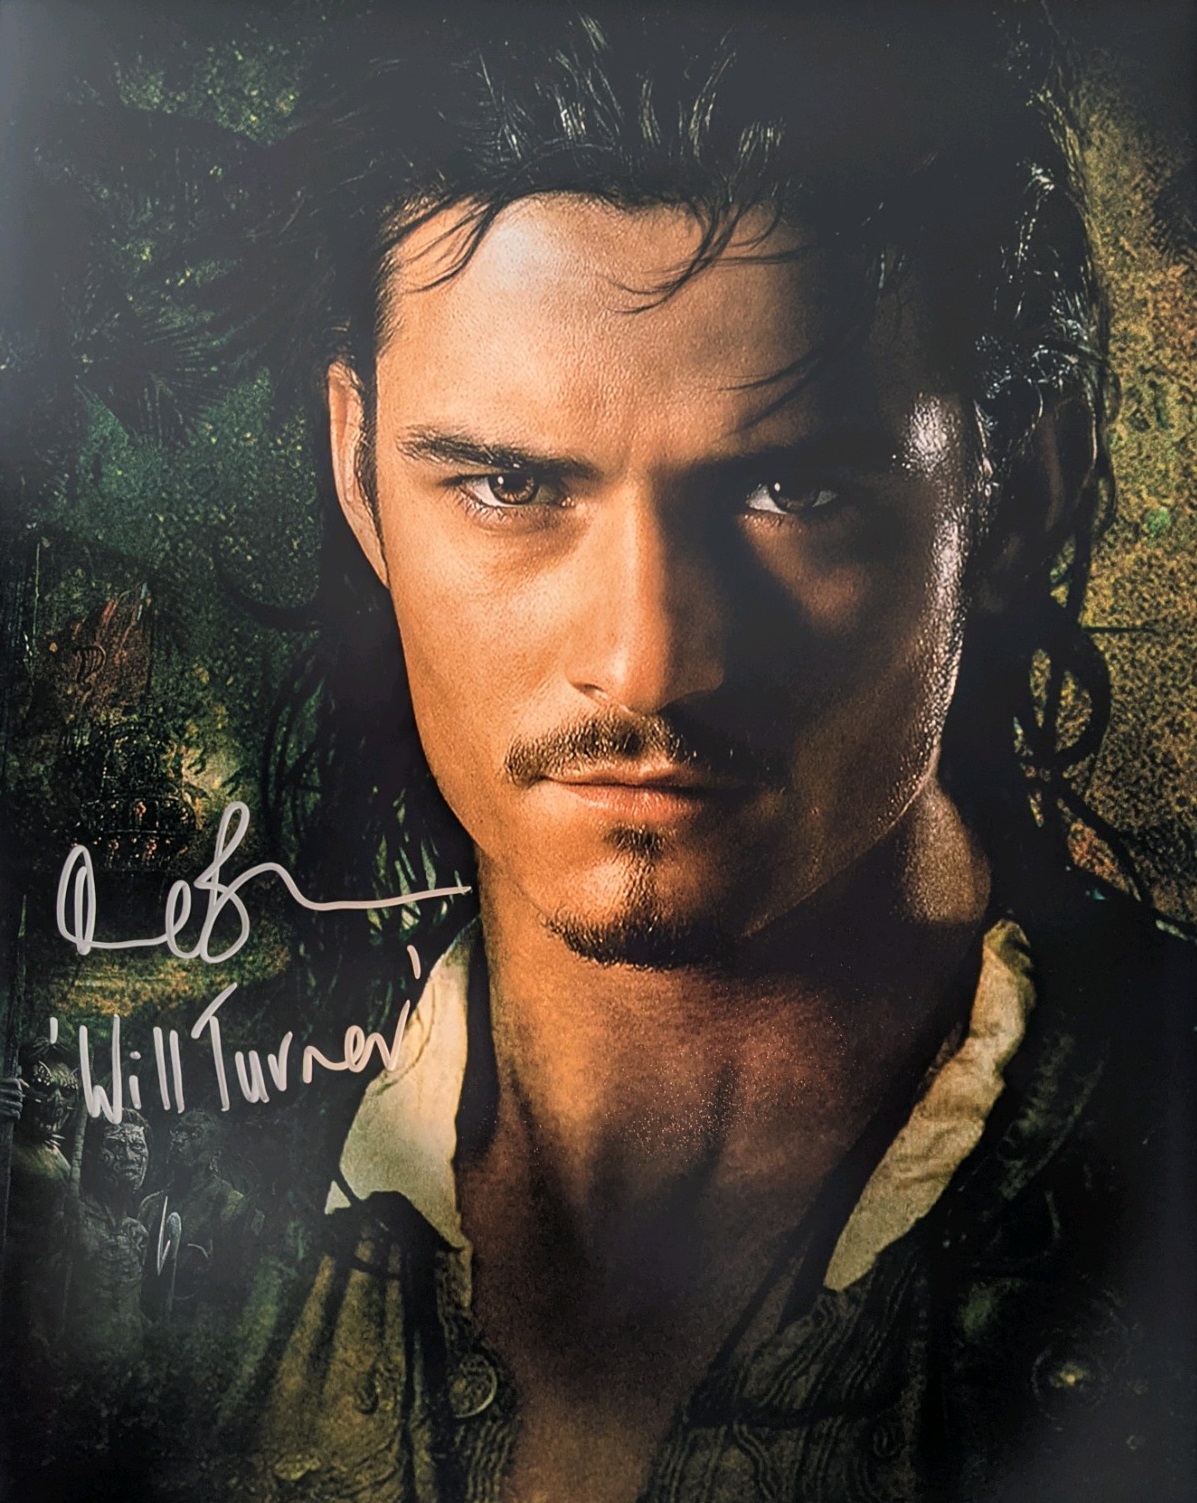 Orlando Bloom Characters: Will Turner Film: Pirates Of The Caribbean: The  Curse Of The Black Pearl